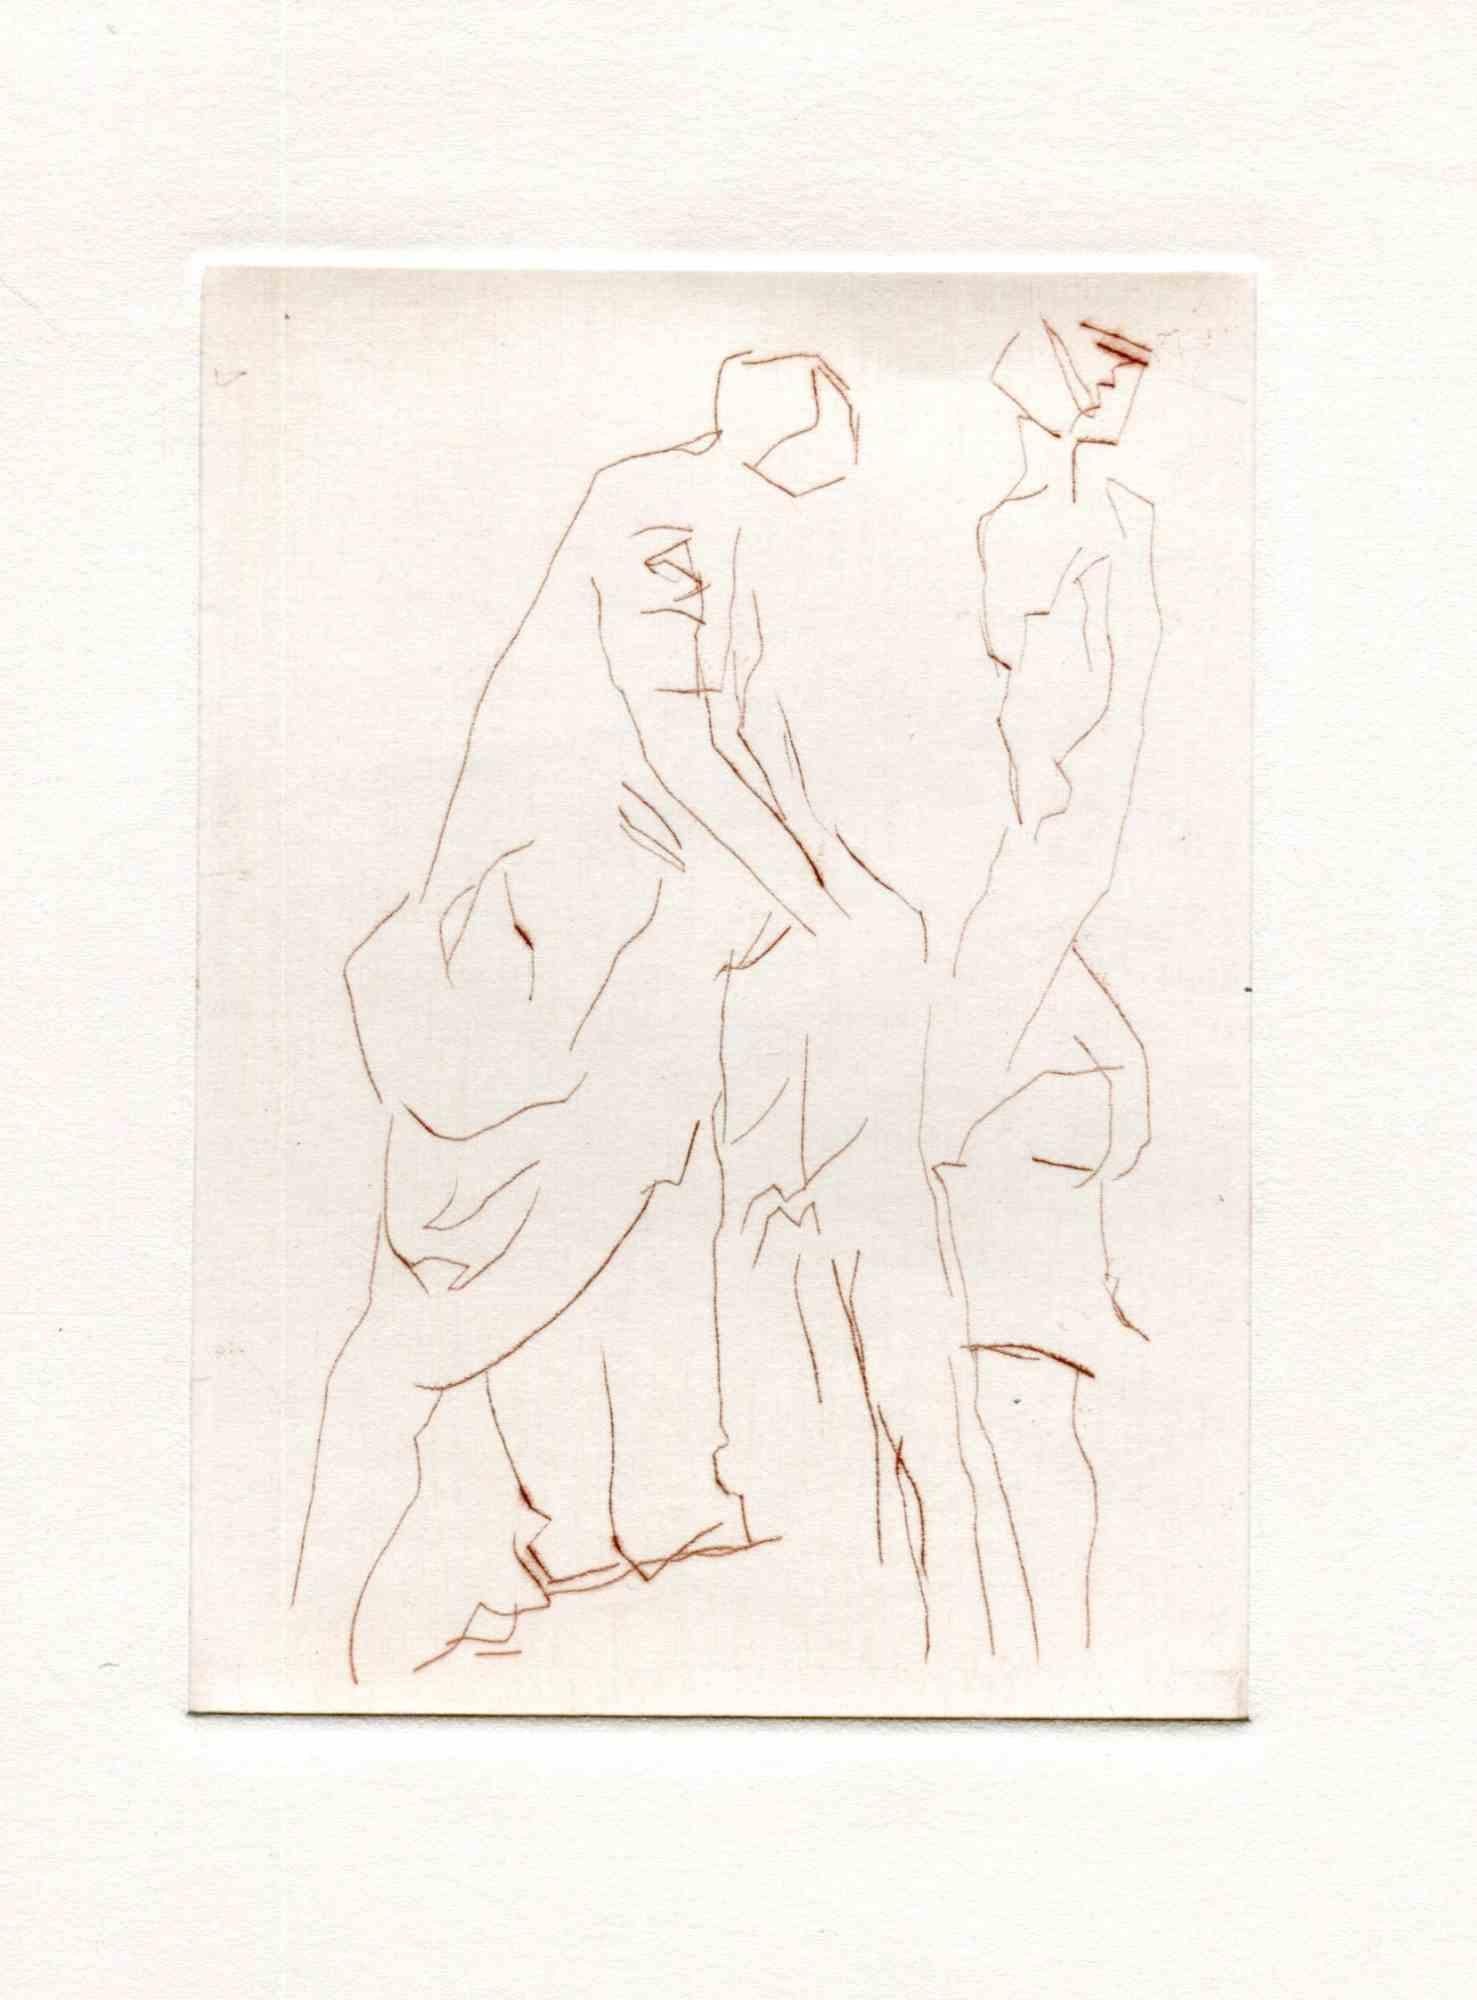 Unknown Figurative Print - Figures - Original Etching and Drypoint - Mid-20th Century